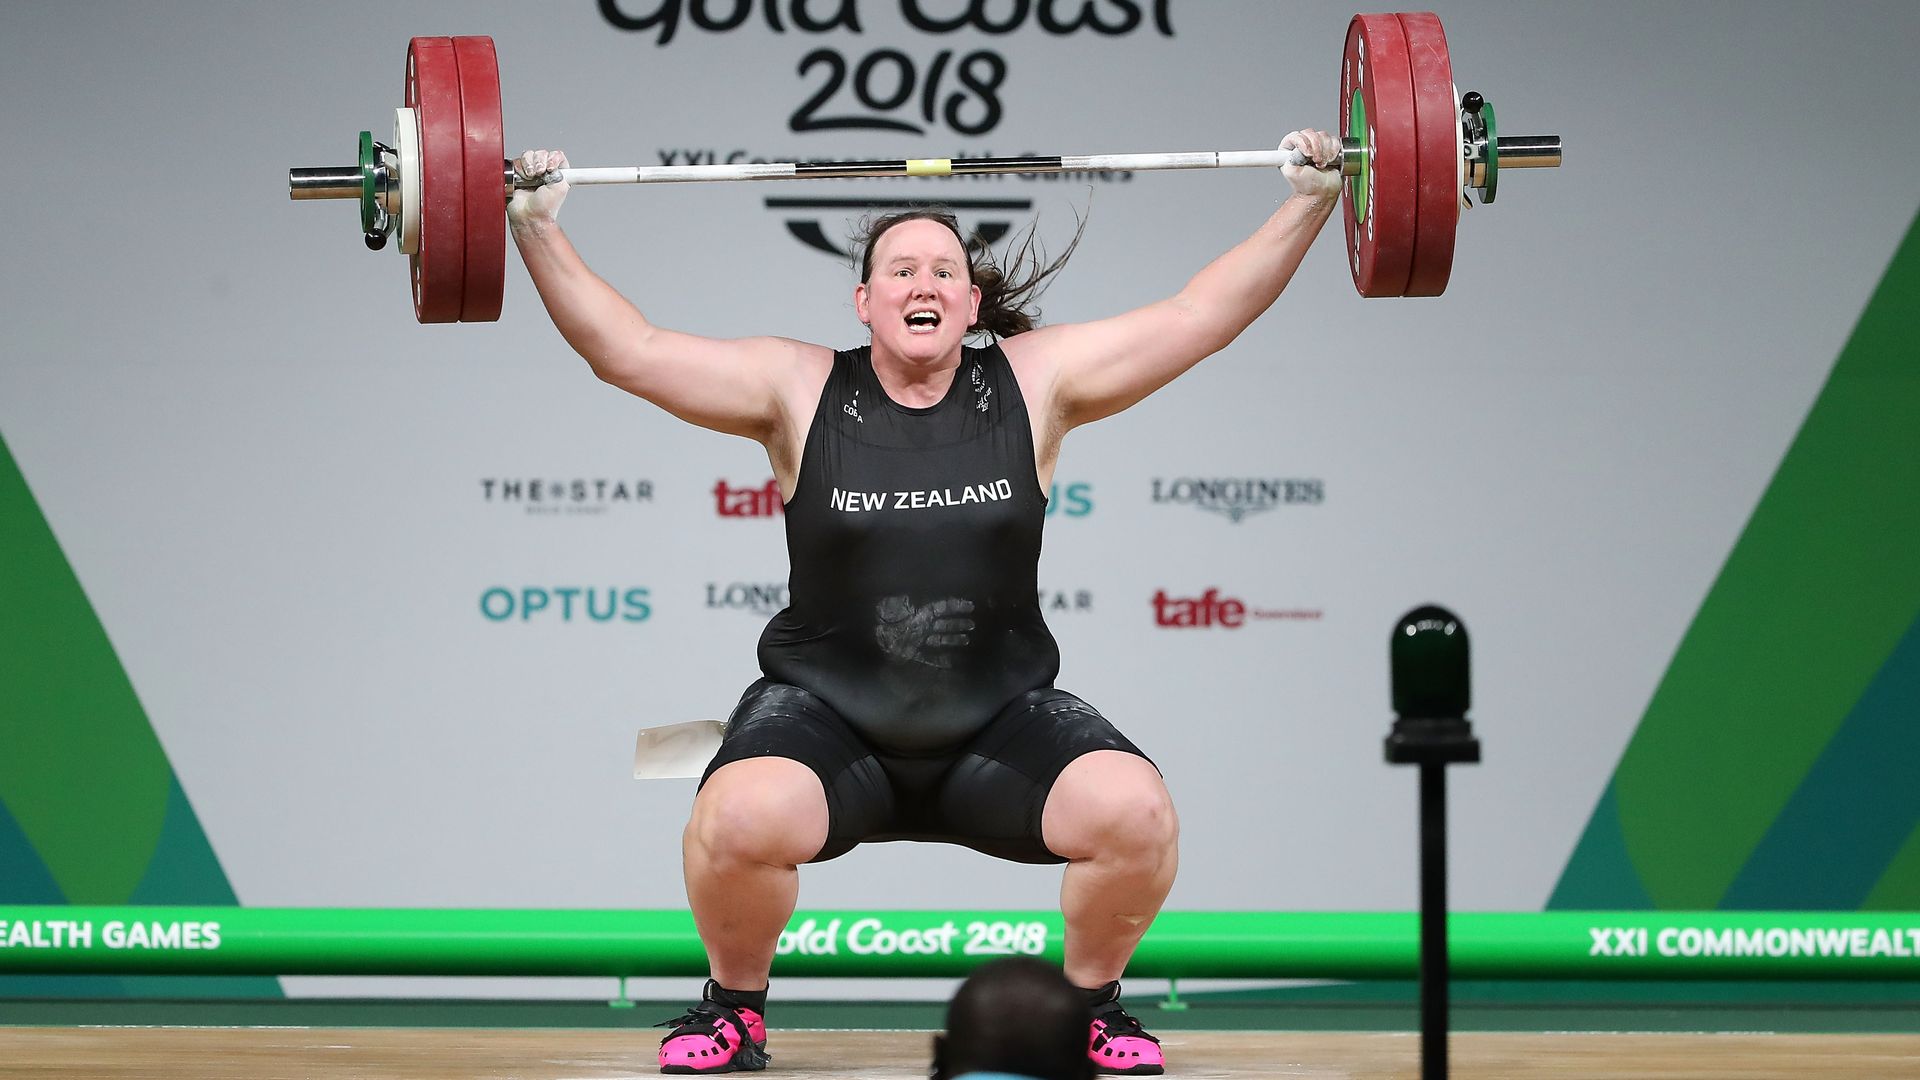 Laurel Hubbard of New Zealand competes in the Women's +90kg Final during the Weightlifting at the Commonwealth Games on April 9, 2018 on the Gold Coast, Australia.